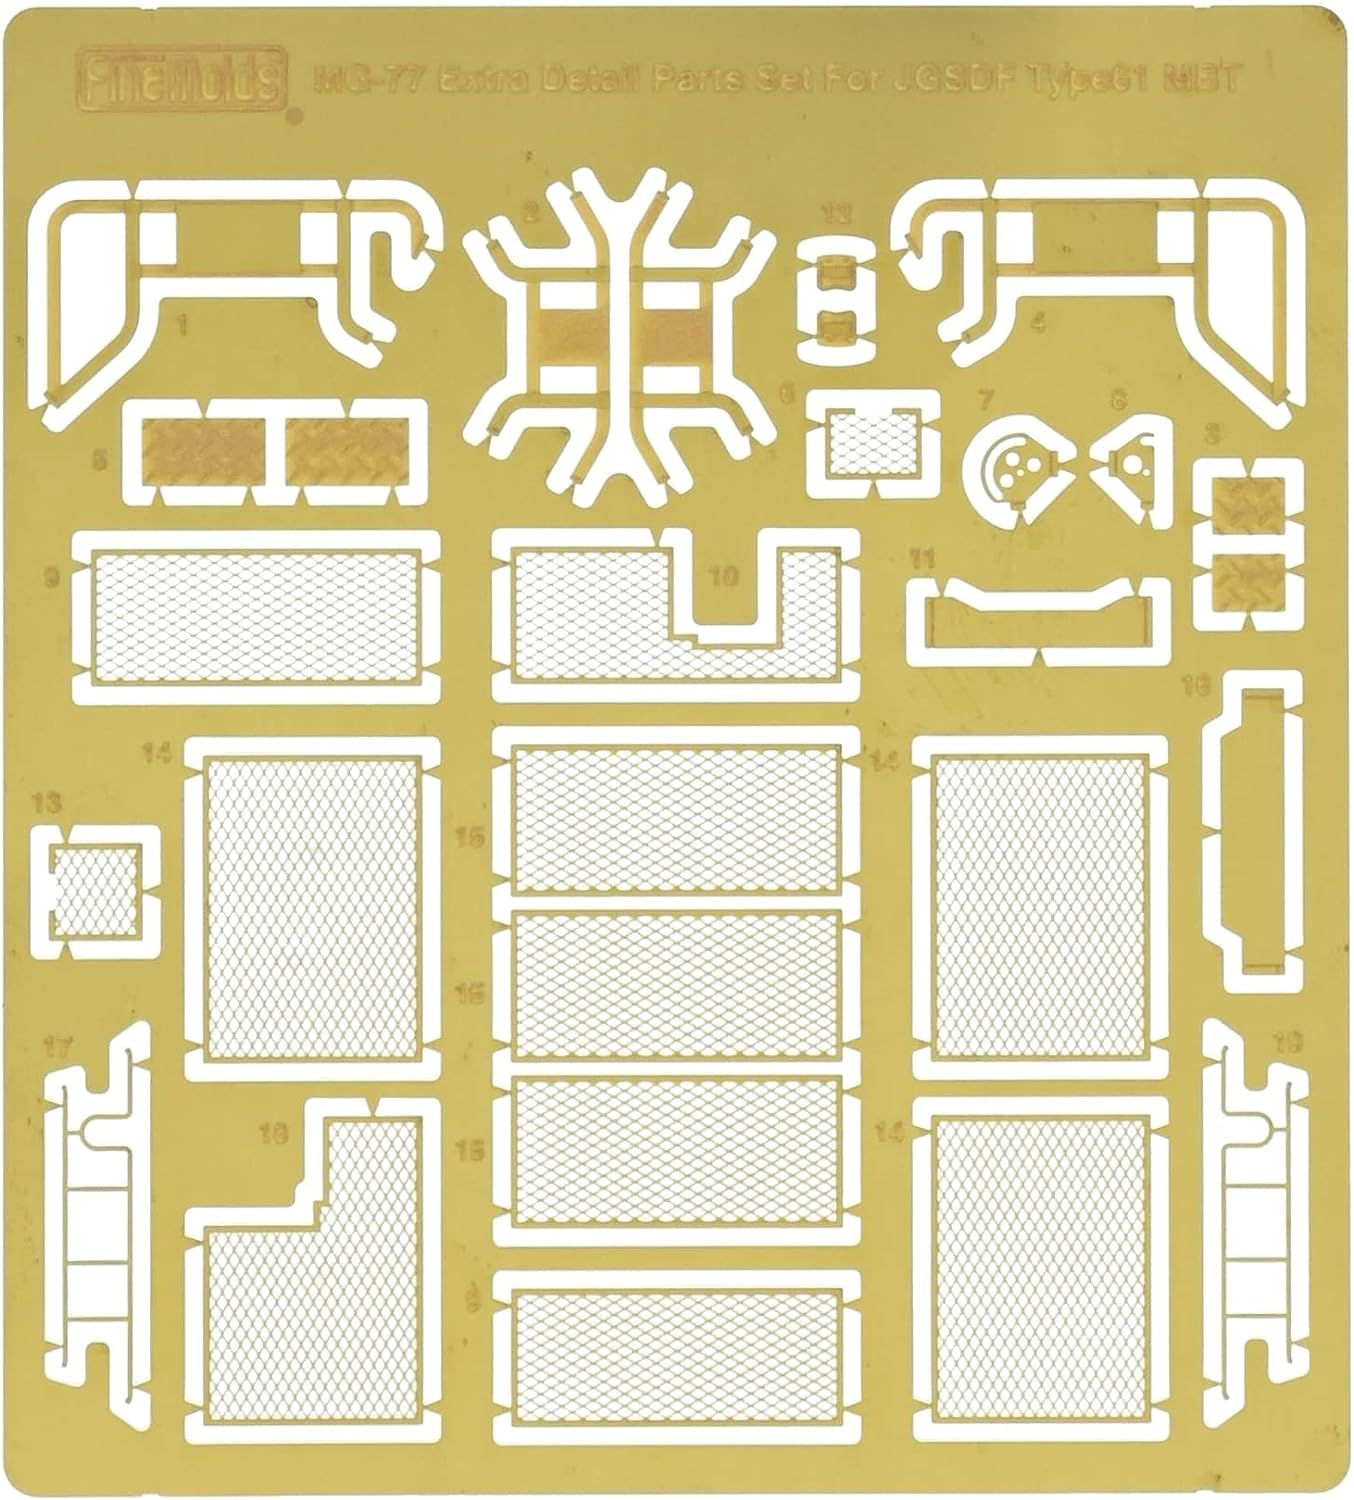 Fine Molds 1/35 detail up Type 61 Tank etched parts - BanzaiHobby